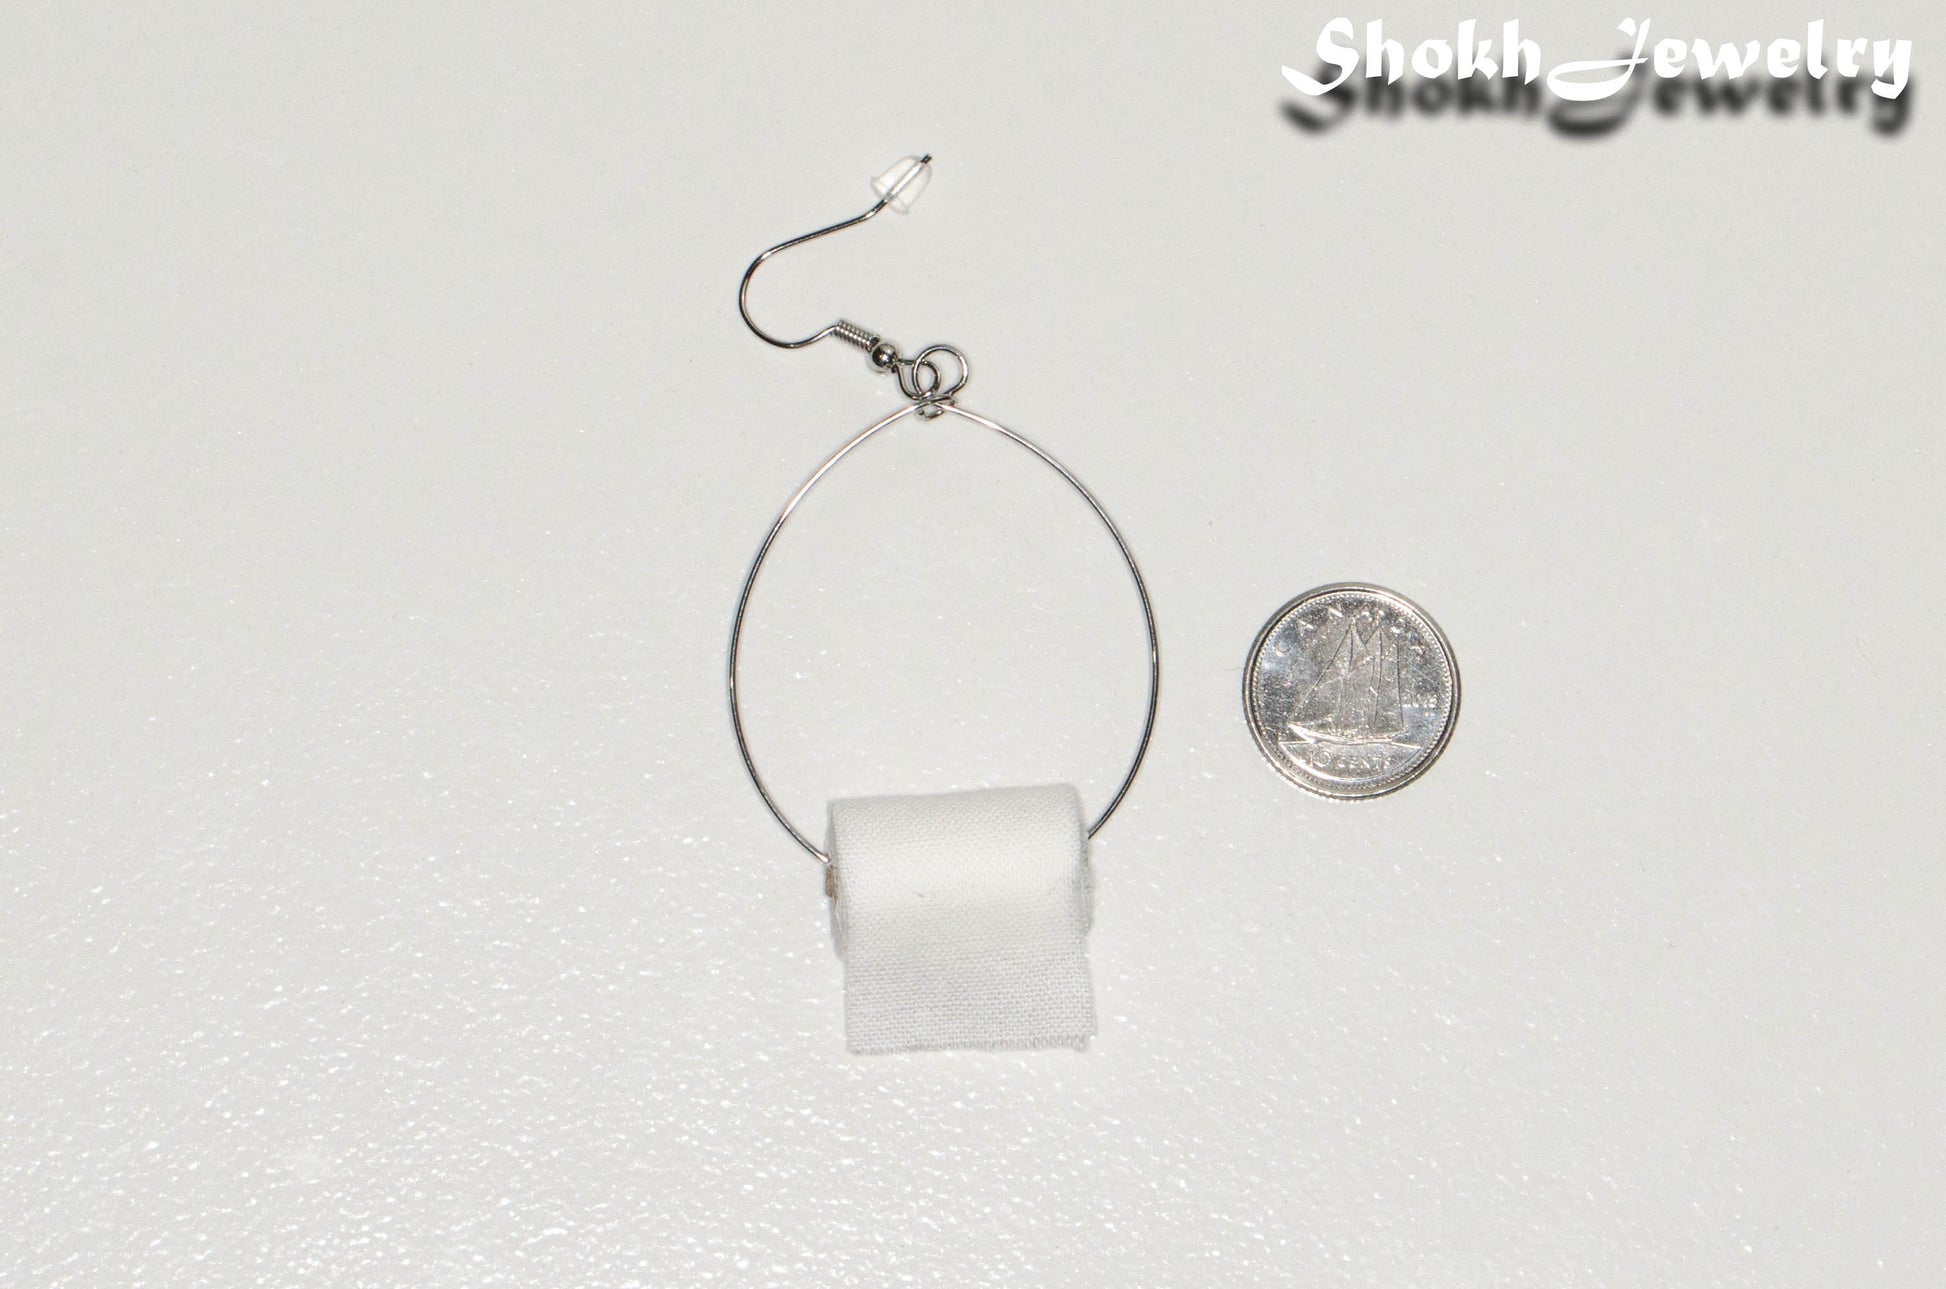 Large Miniature Toilet Paper Roll Earring beside a dime.